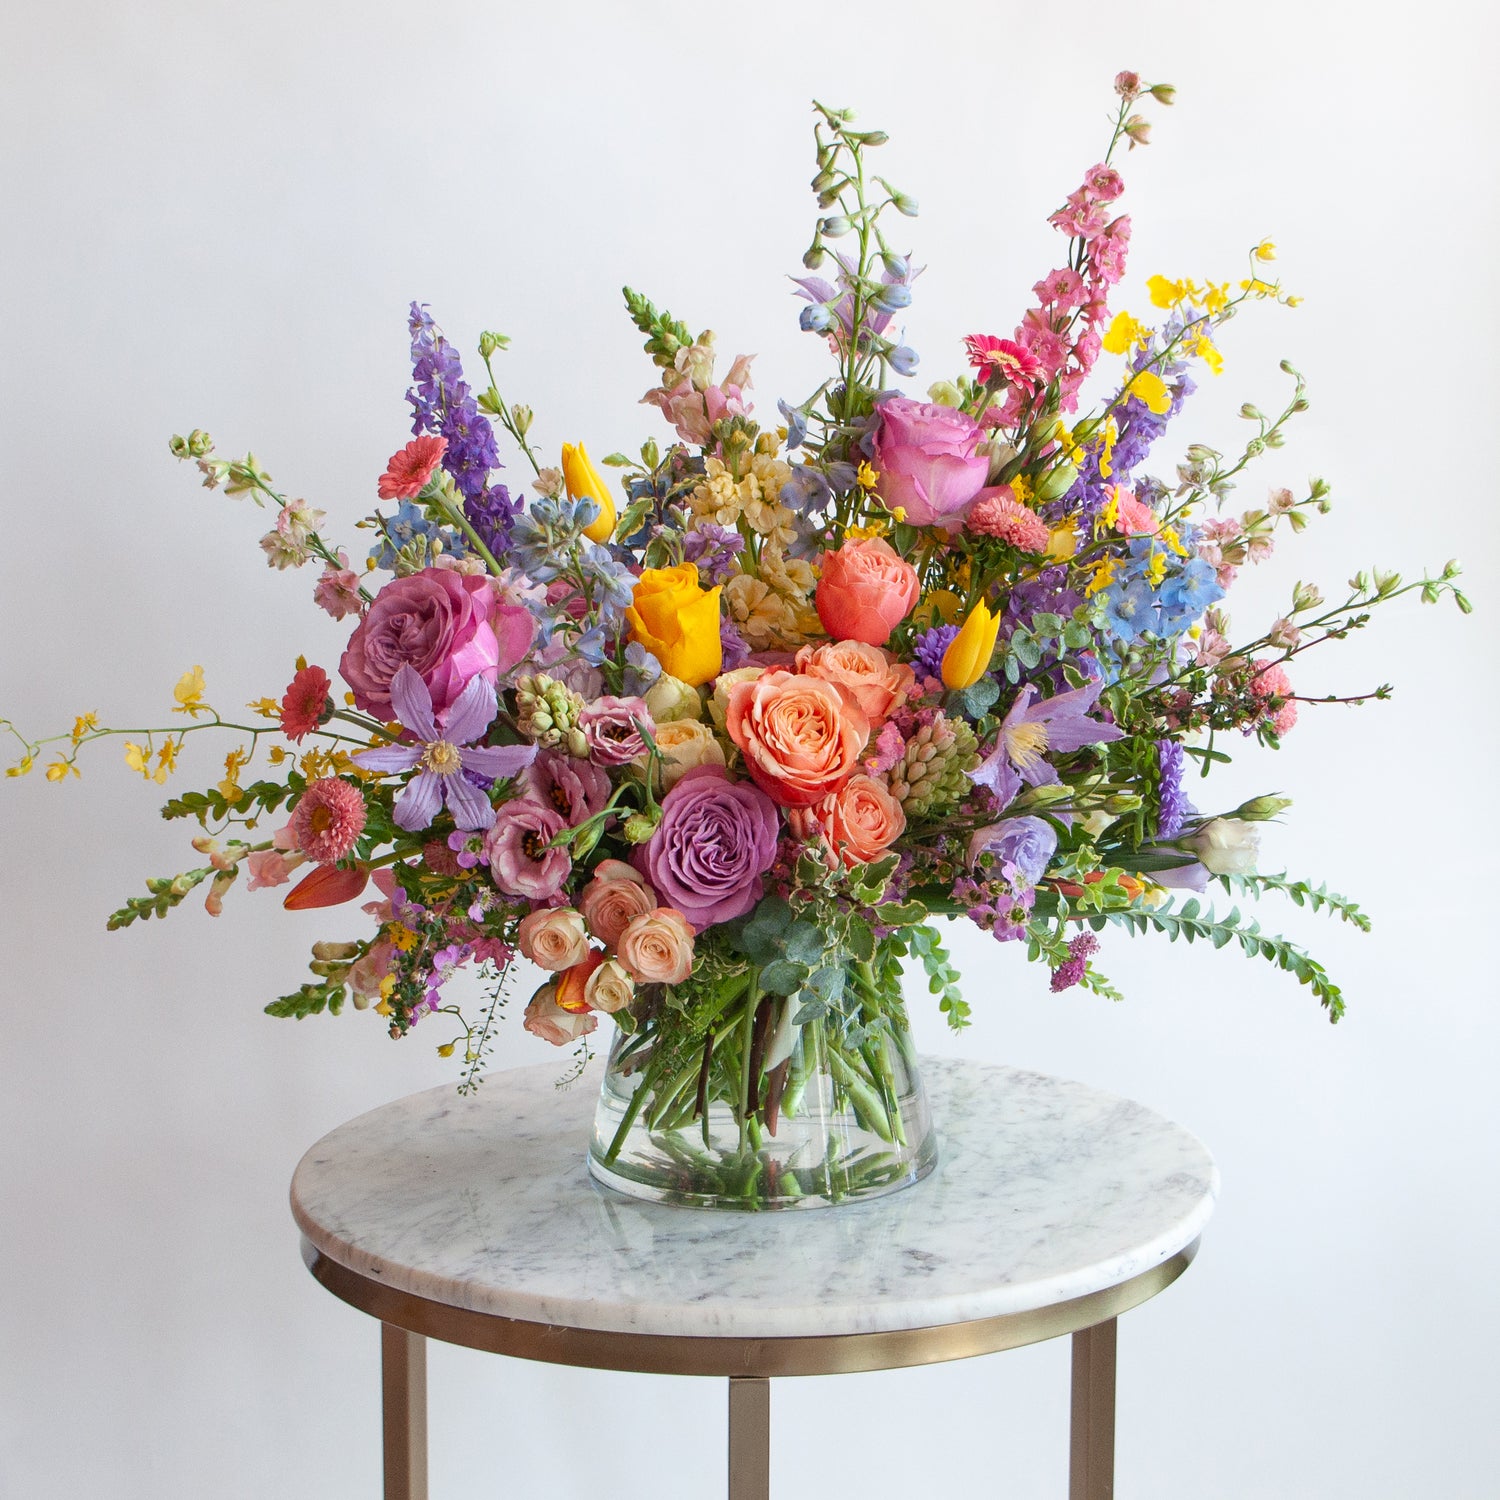 A glass vase with a medium flower arrangement sits on a marble table in front of a white backdrop. The flowers are many colors and include roses, tulips, daisies, snapdragon, clematis, stock, hyacinth, orchids, and delphinium.